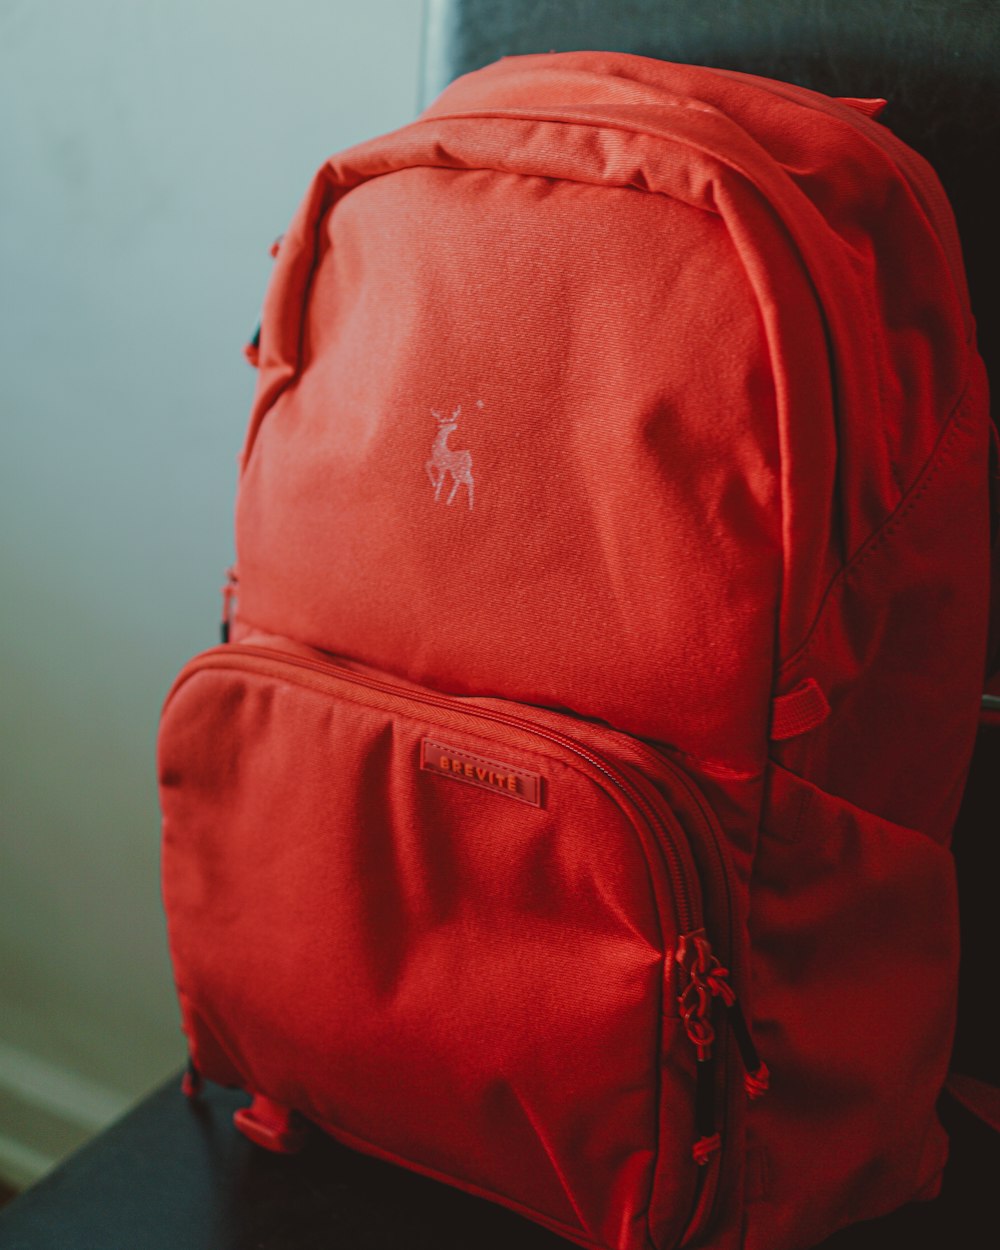 red and black backpack on white table